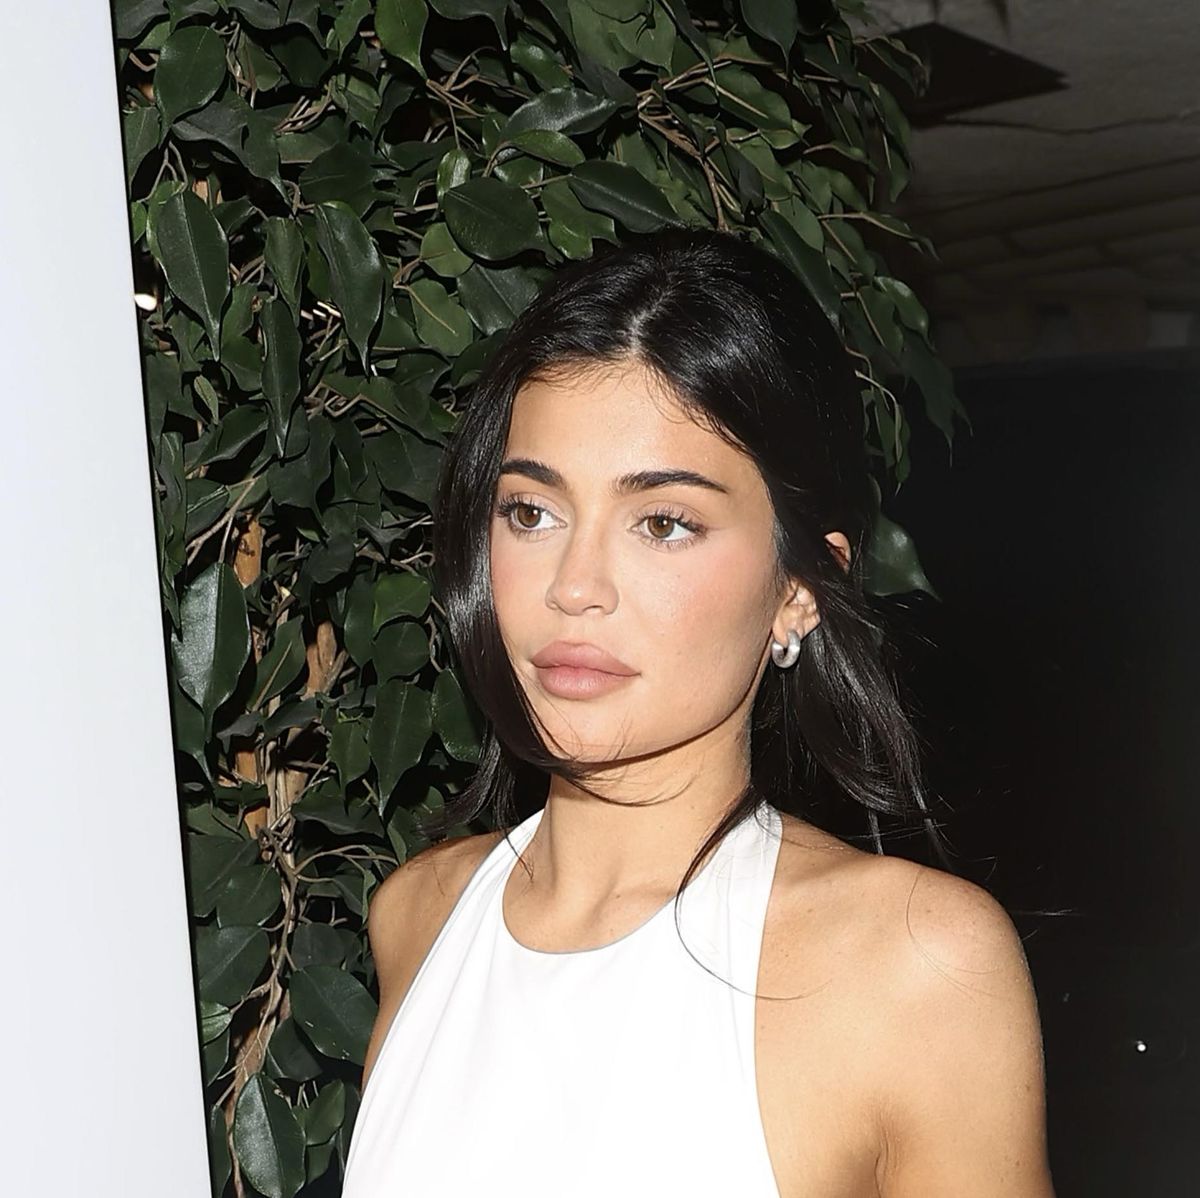 Kylie Jenner Uses Aging Filter to Show Face with Eye Bags, Wrinkles